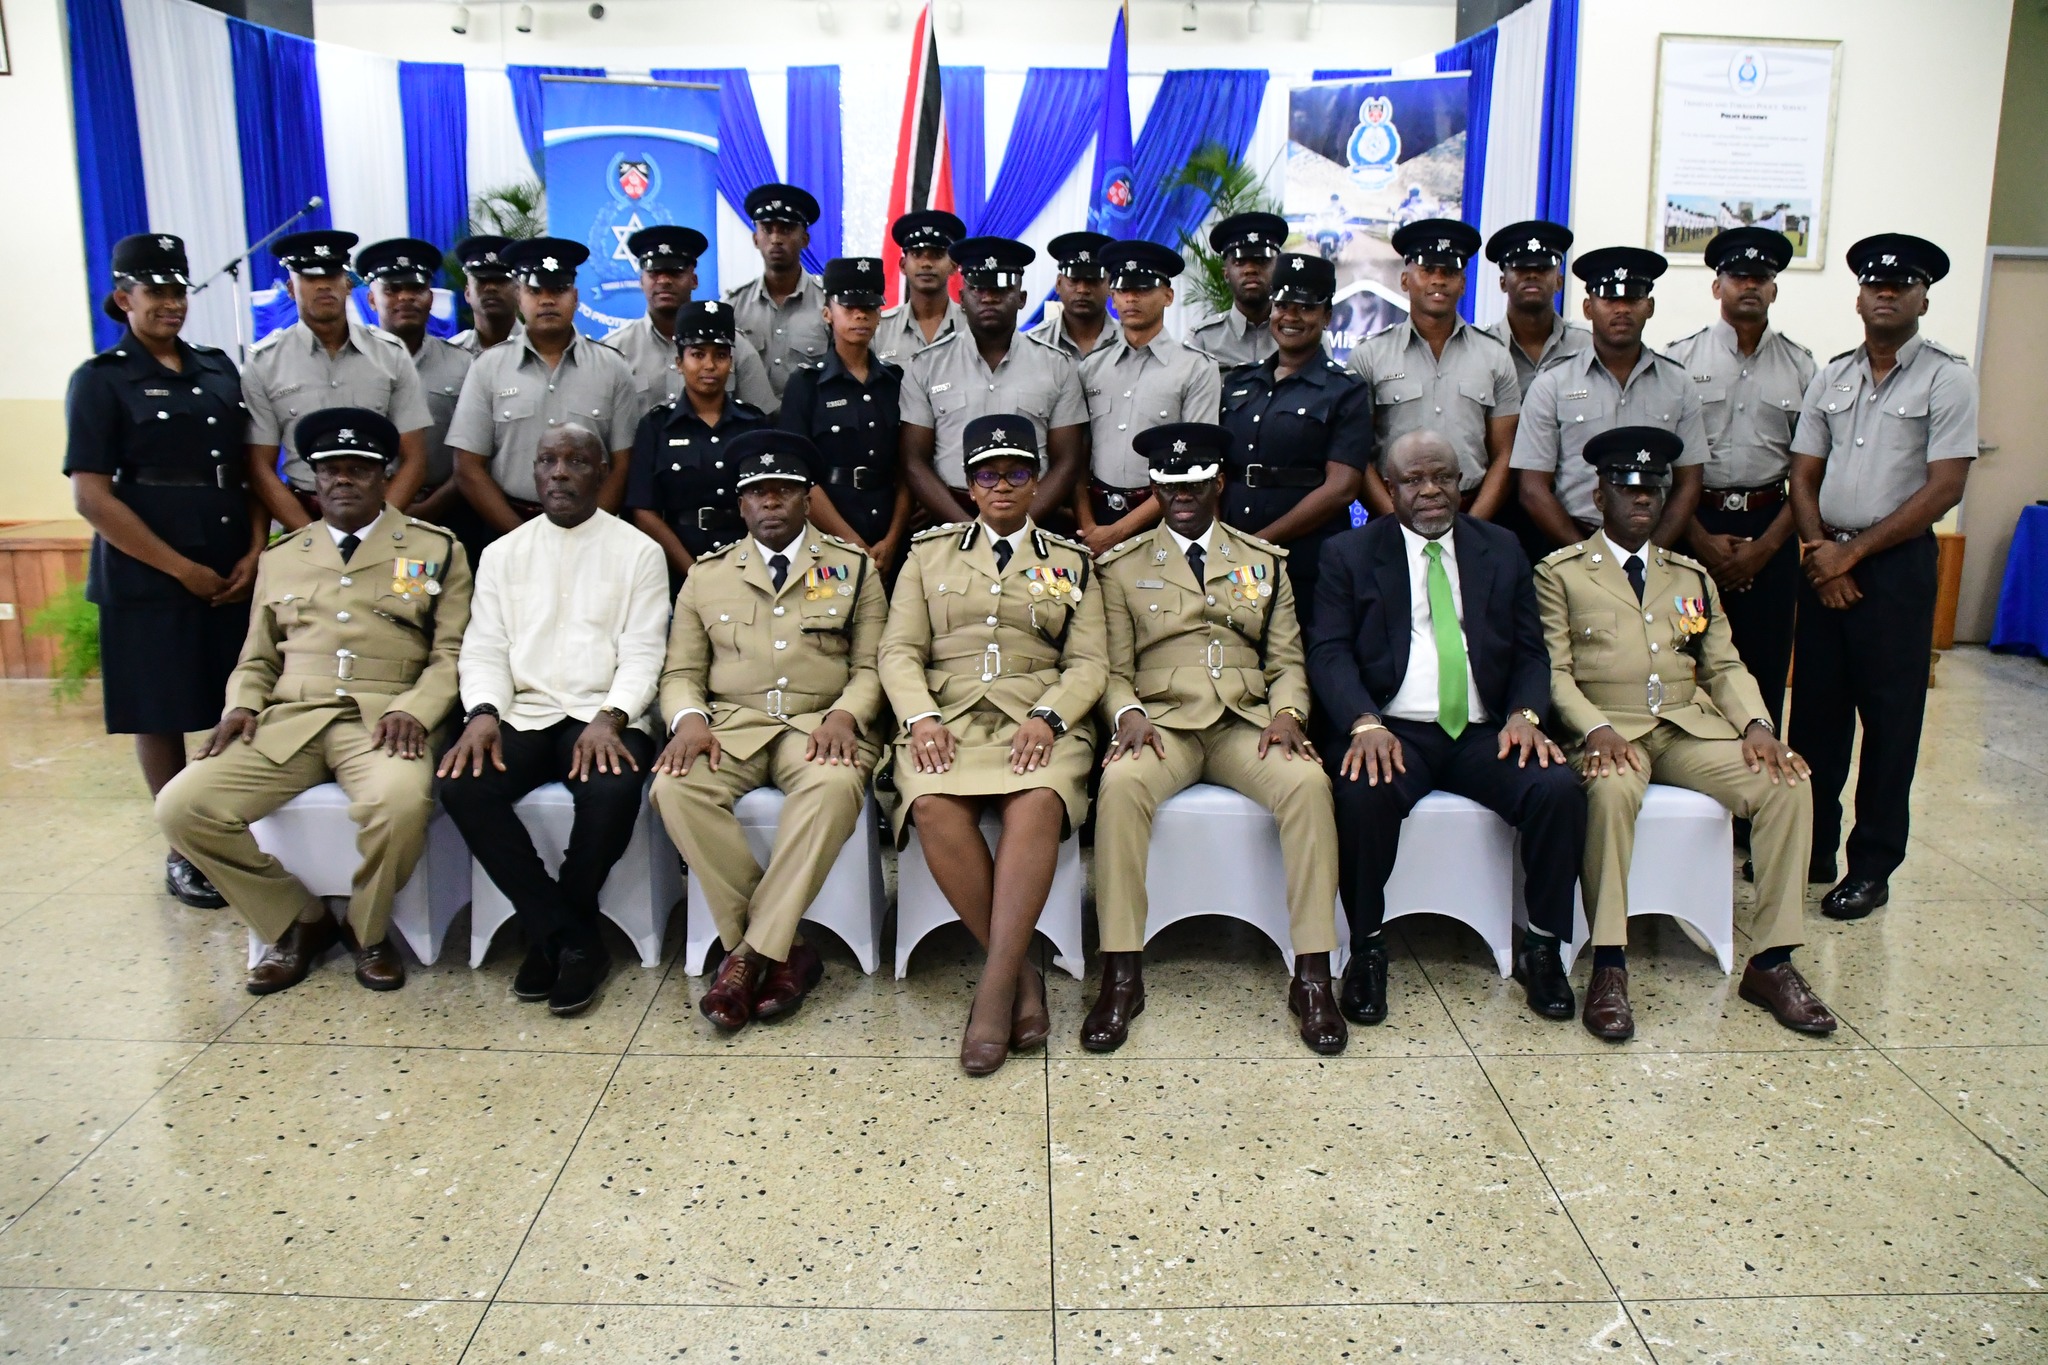 97 new officers join the TTPS